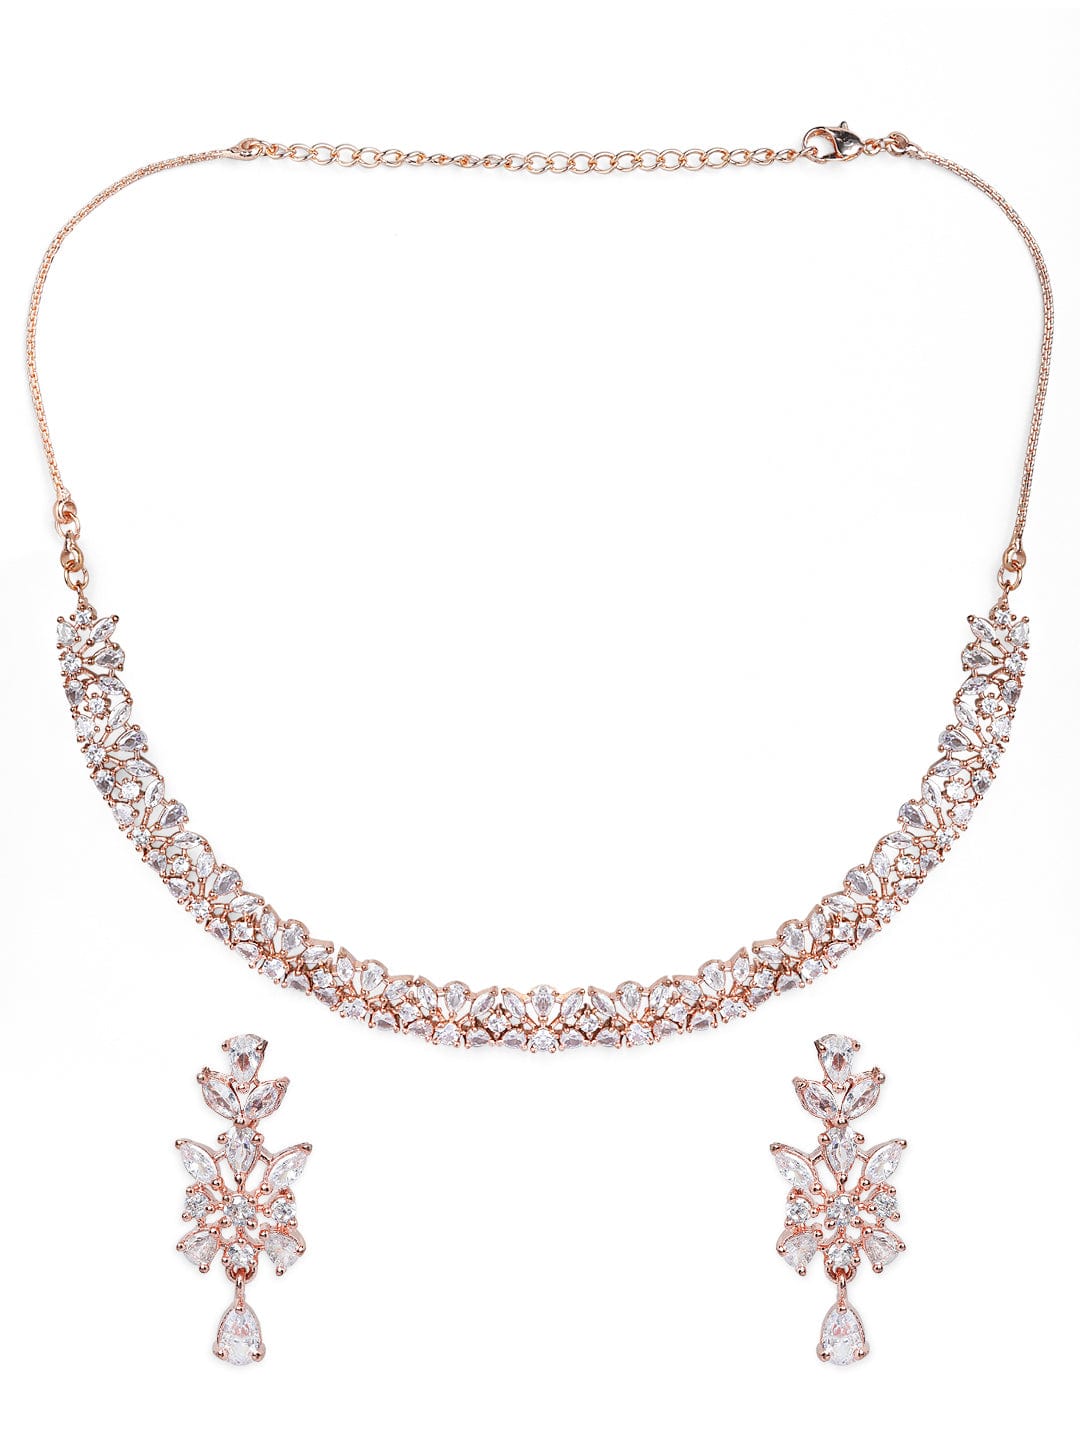 Simple Necklace Designs In Gold with Price - JD SOLITAIRE